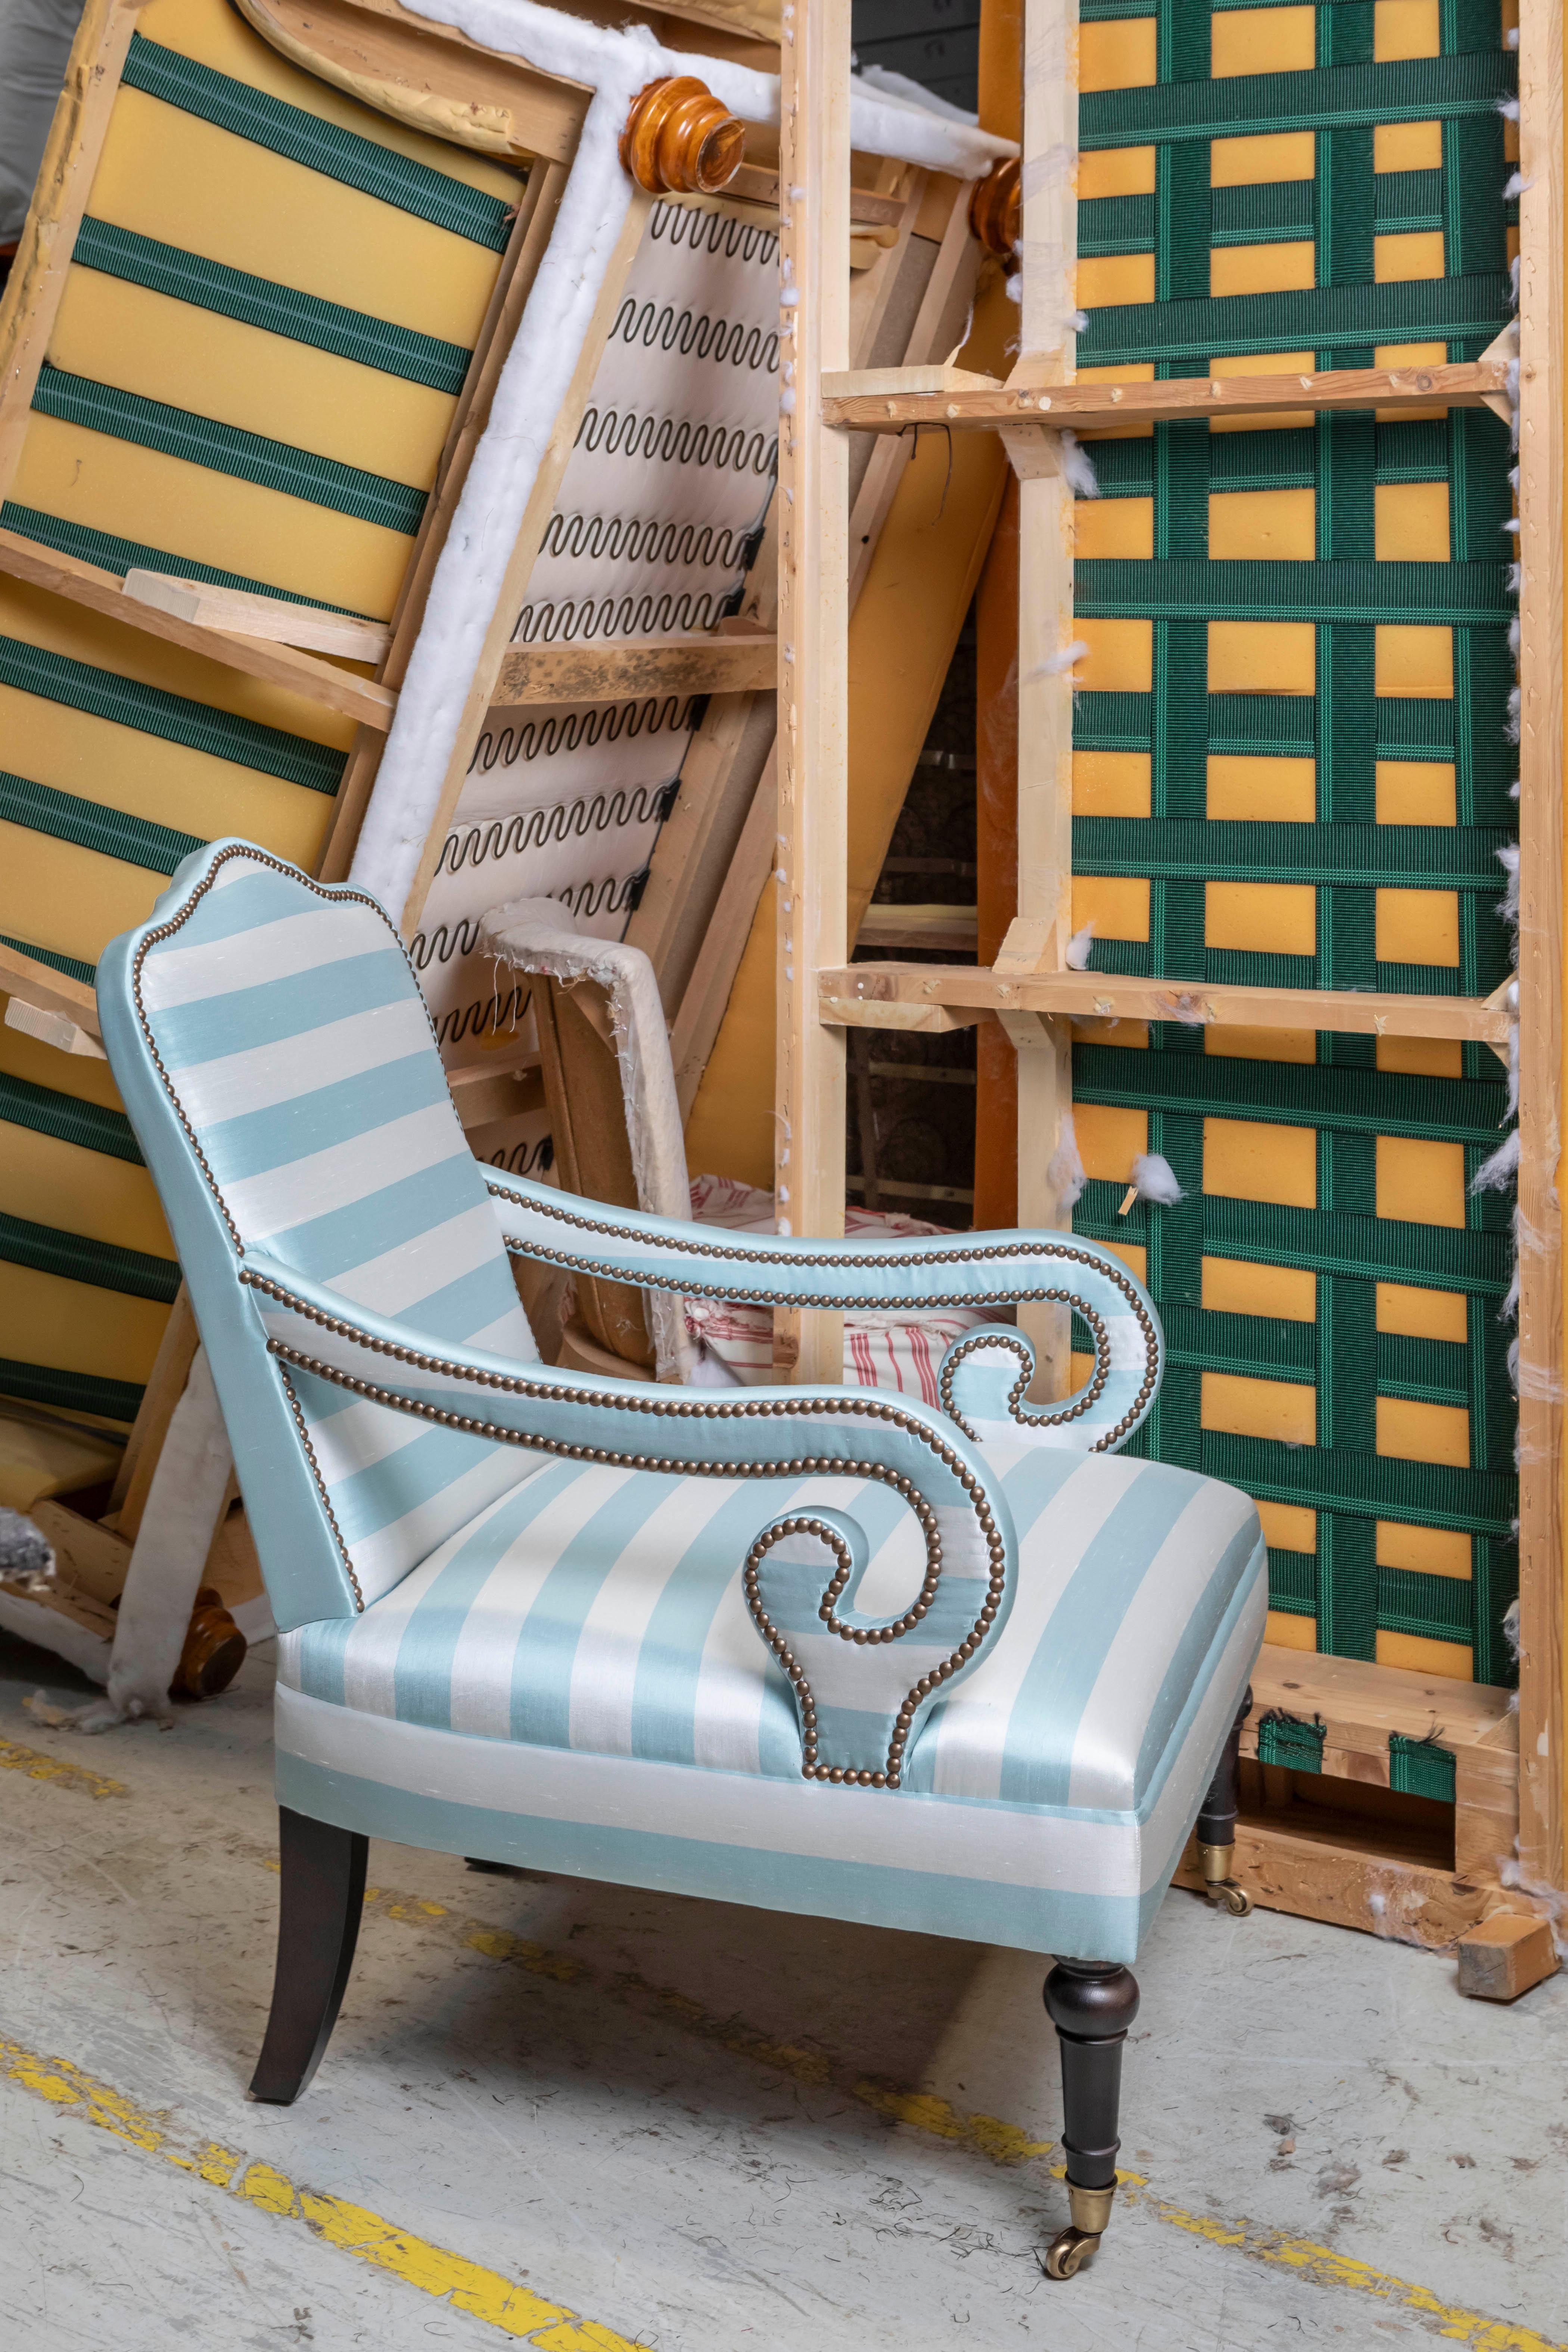 Drawing inspiration from a multitude of classical references, the Montague Armchair is endlessly comfortable and has been used again and again in Samantha Todhunter Design projects, upholstered in Bruno Triplet four ply striped blue and cream silk,